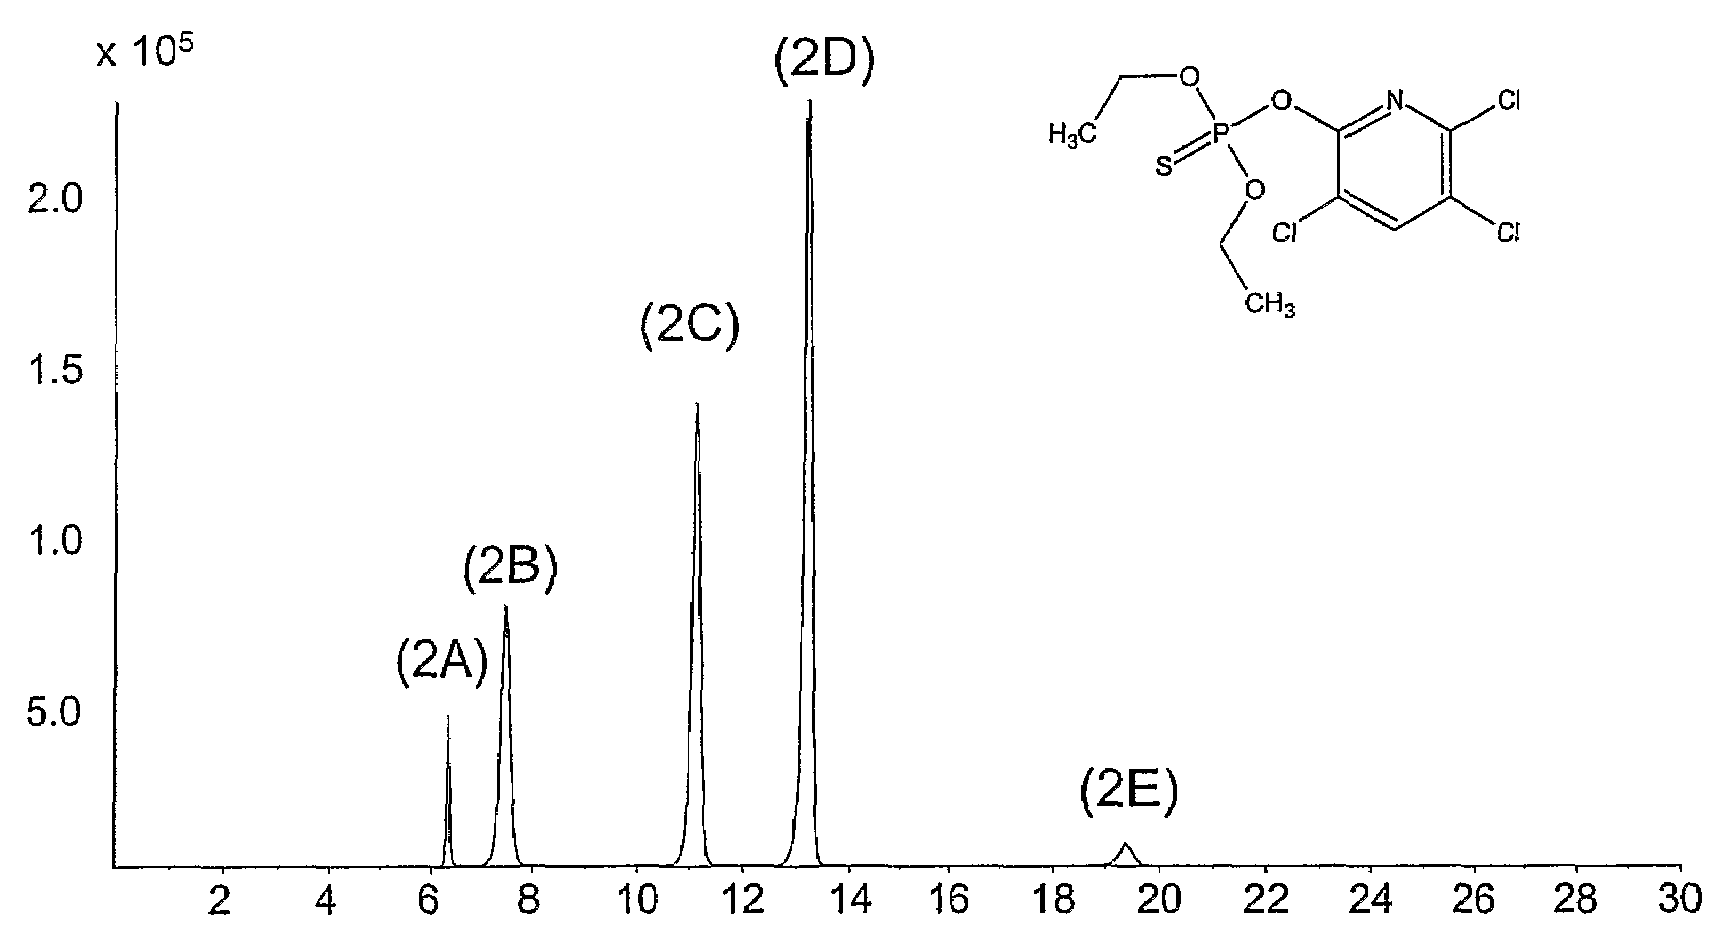 Mixed-modal anion-exchanged type separation material